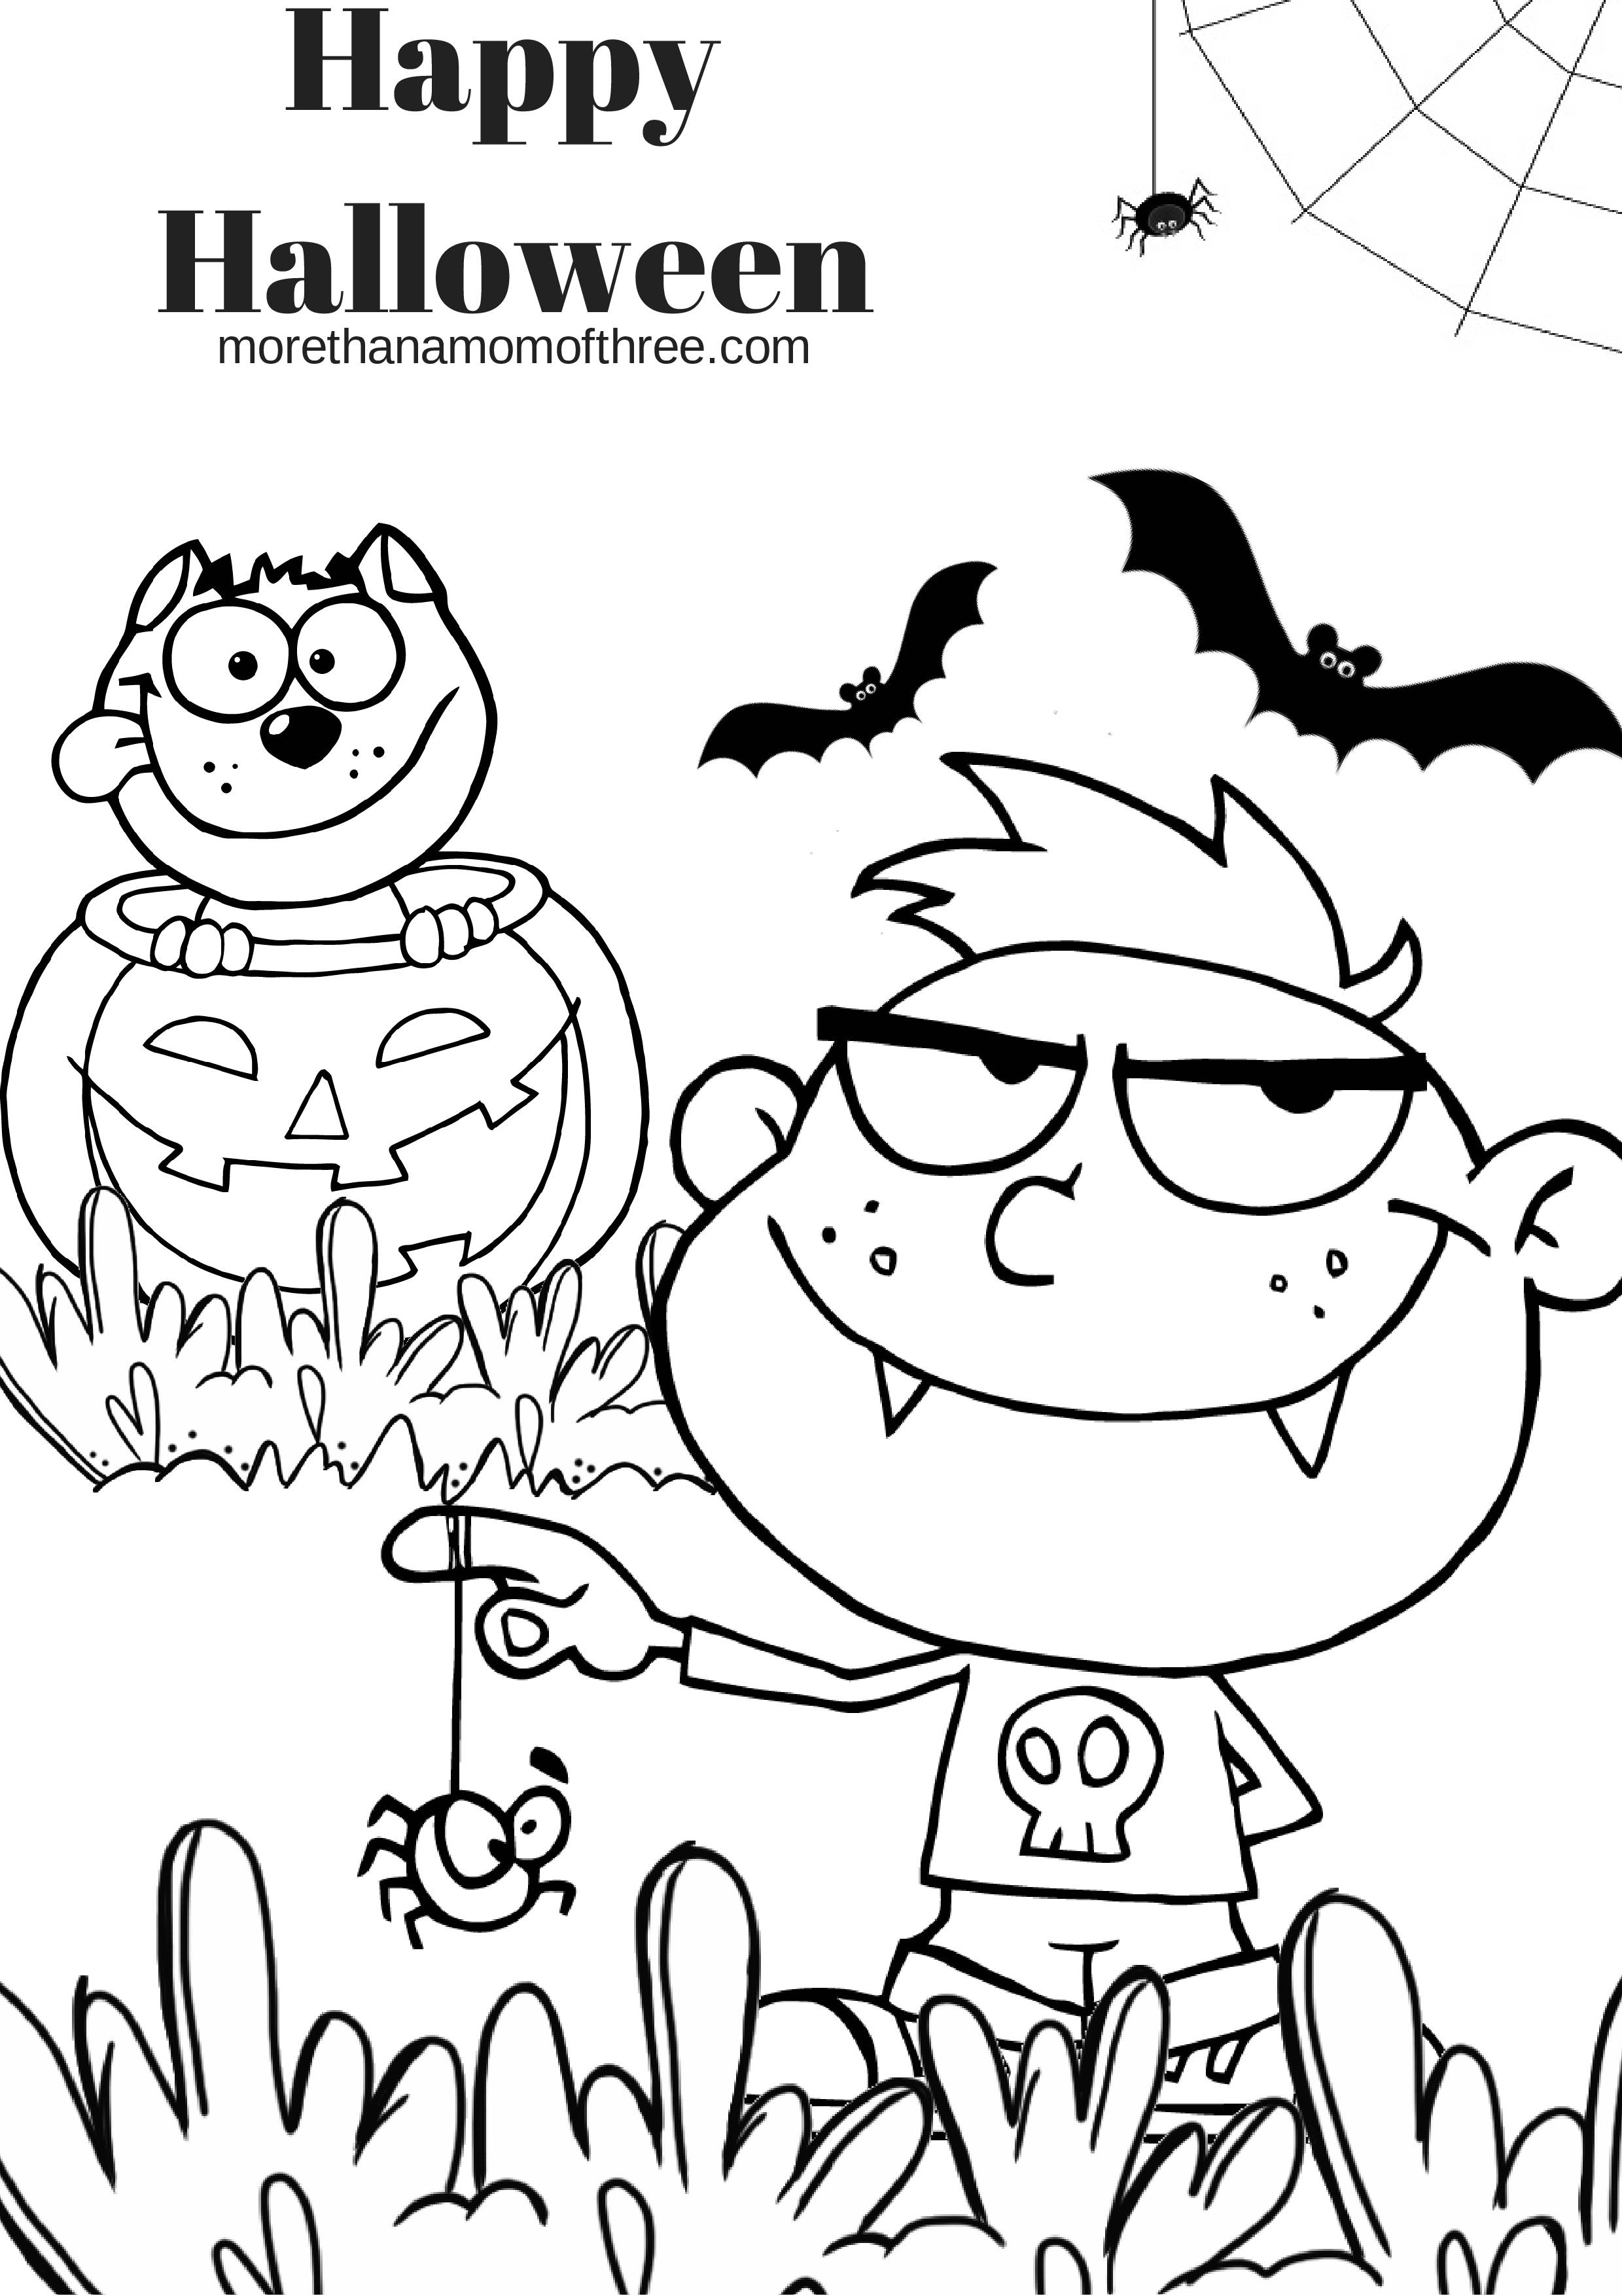 Free Happy Halloween Coloring Pages - Coloring Home